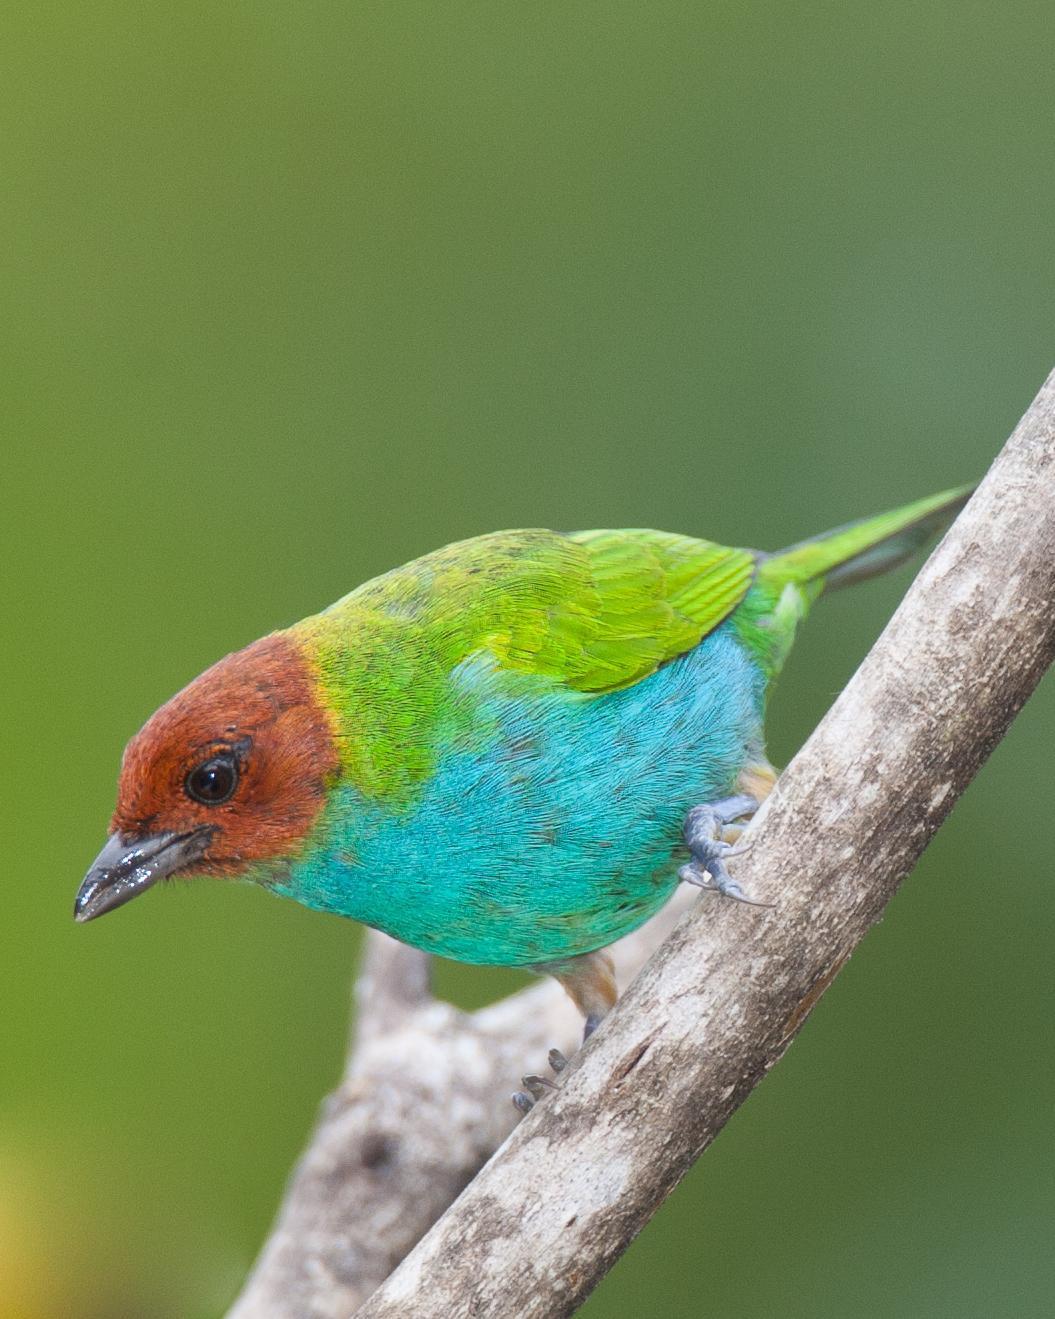 Bay-headed Tanager Photo by Robert Lewis